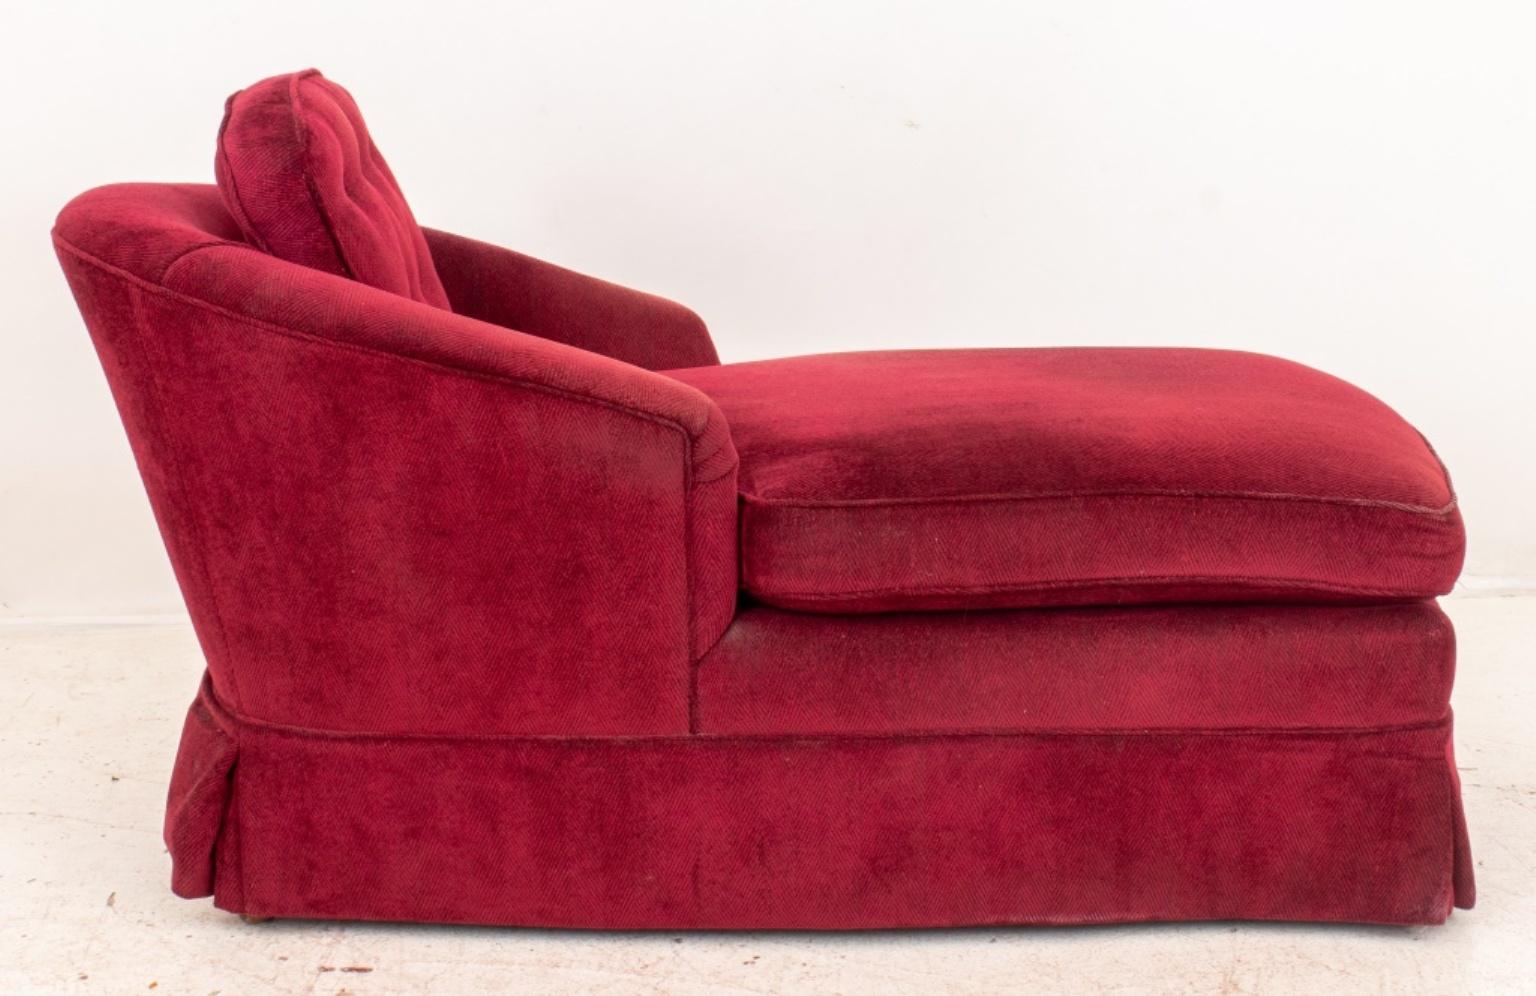 Upholstered Chaise Lounge 1